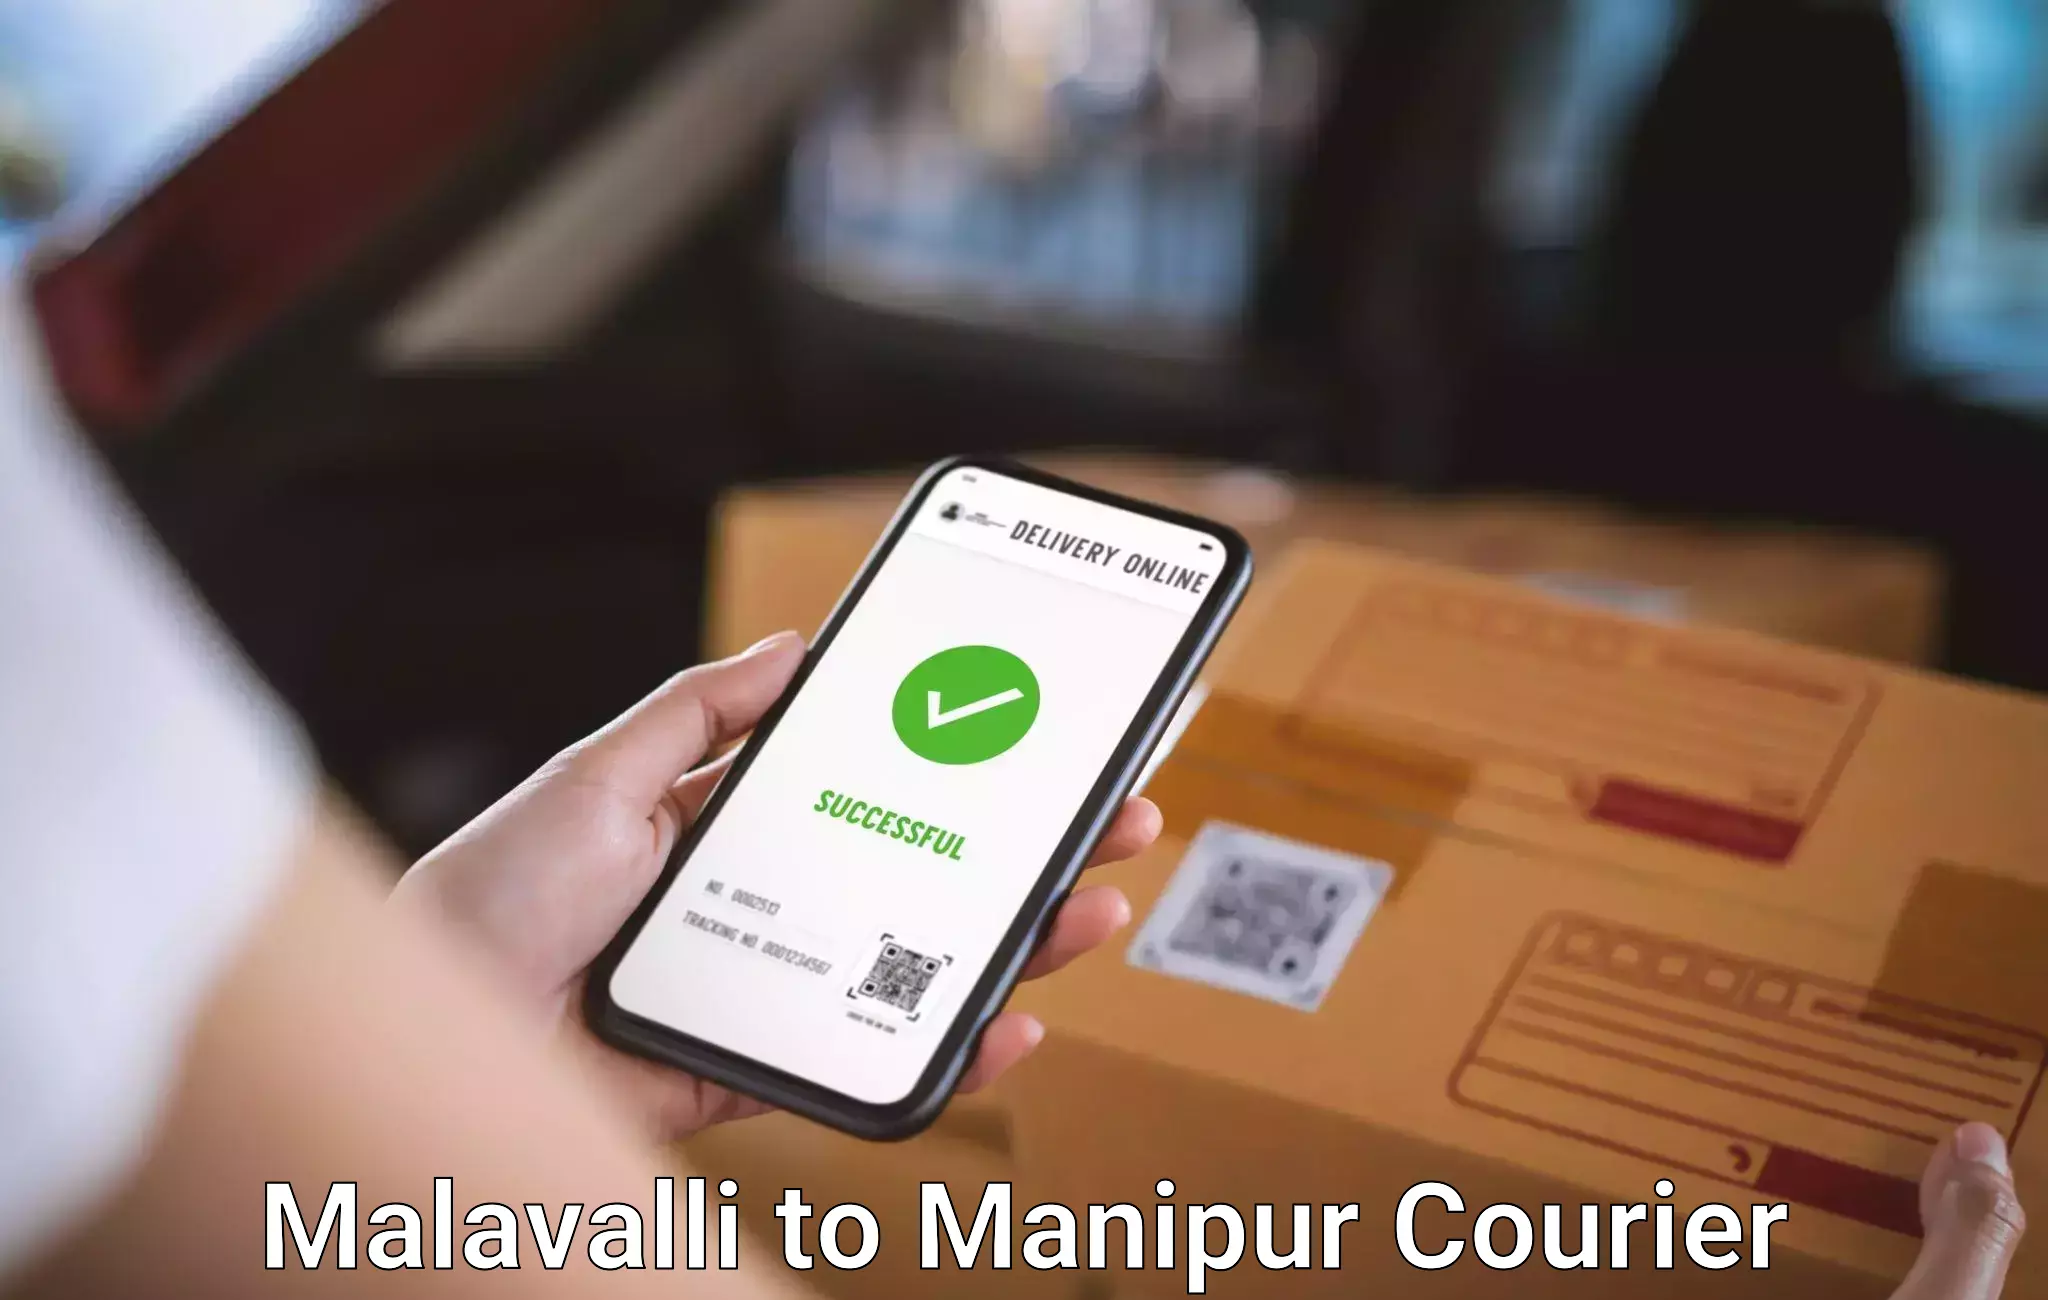 Quick luggage shipment in Malavalli to Manipur